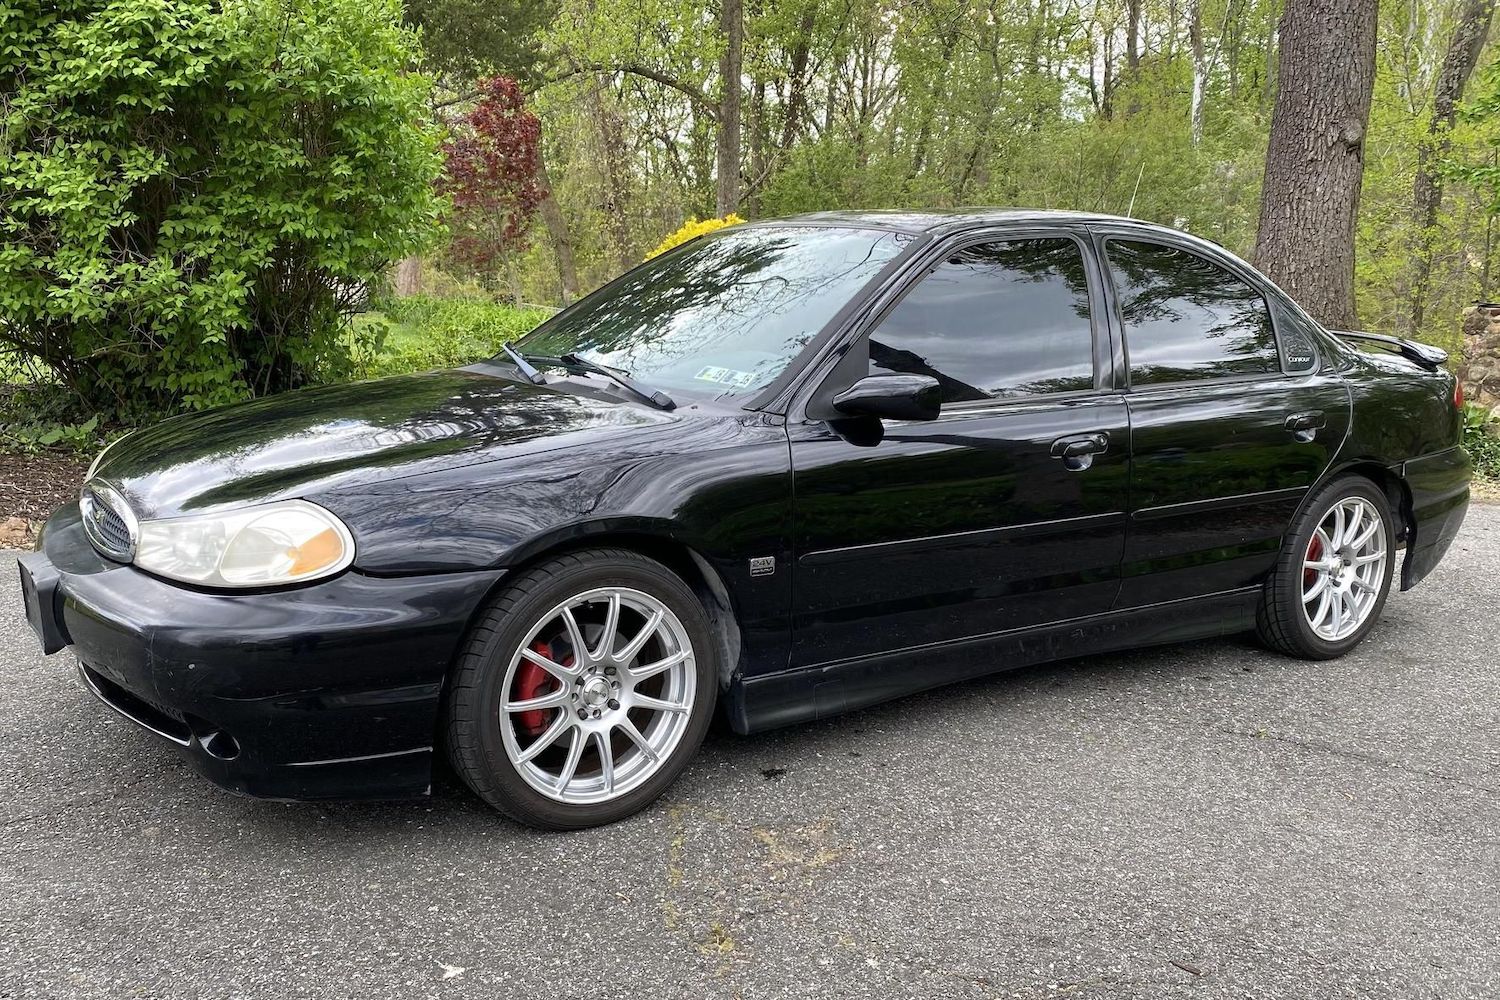 Ultra-Rare, Lightly Modified 2000 Ford Contour SVT Up For Auction